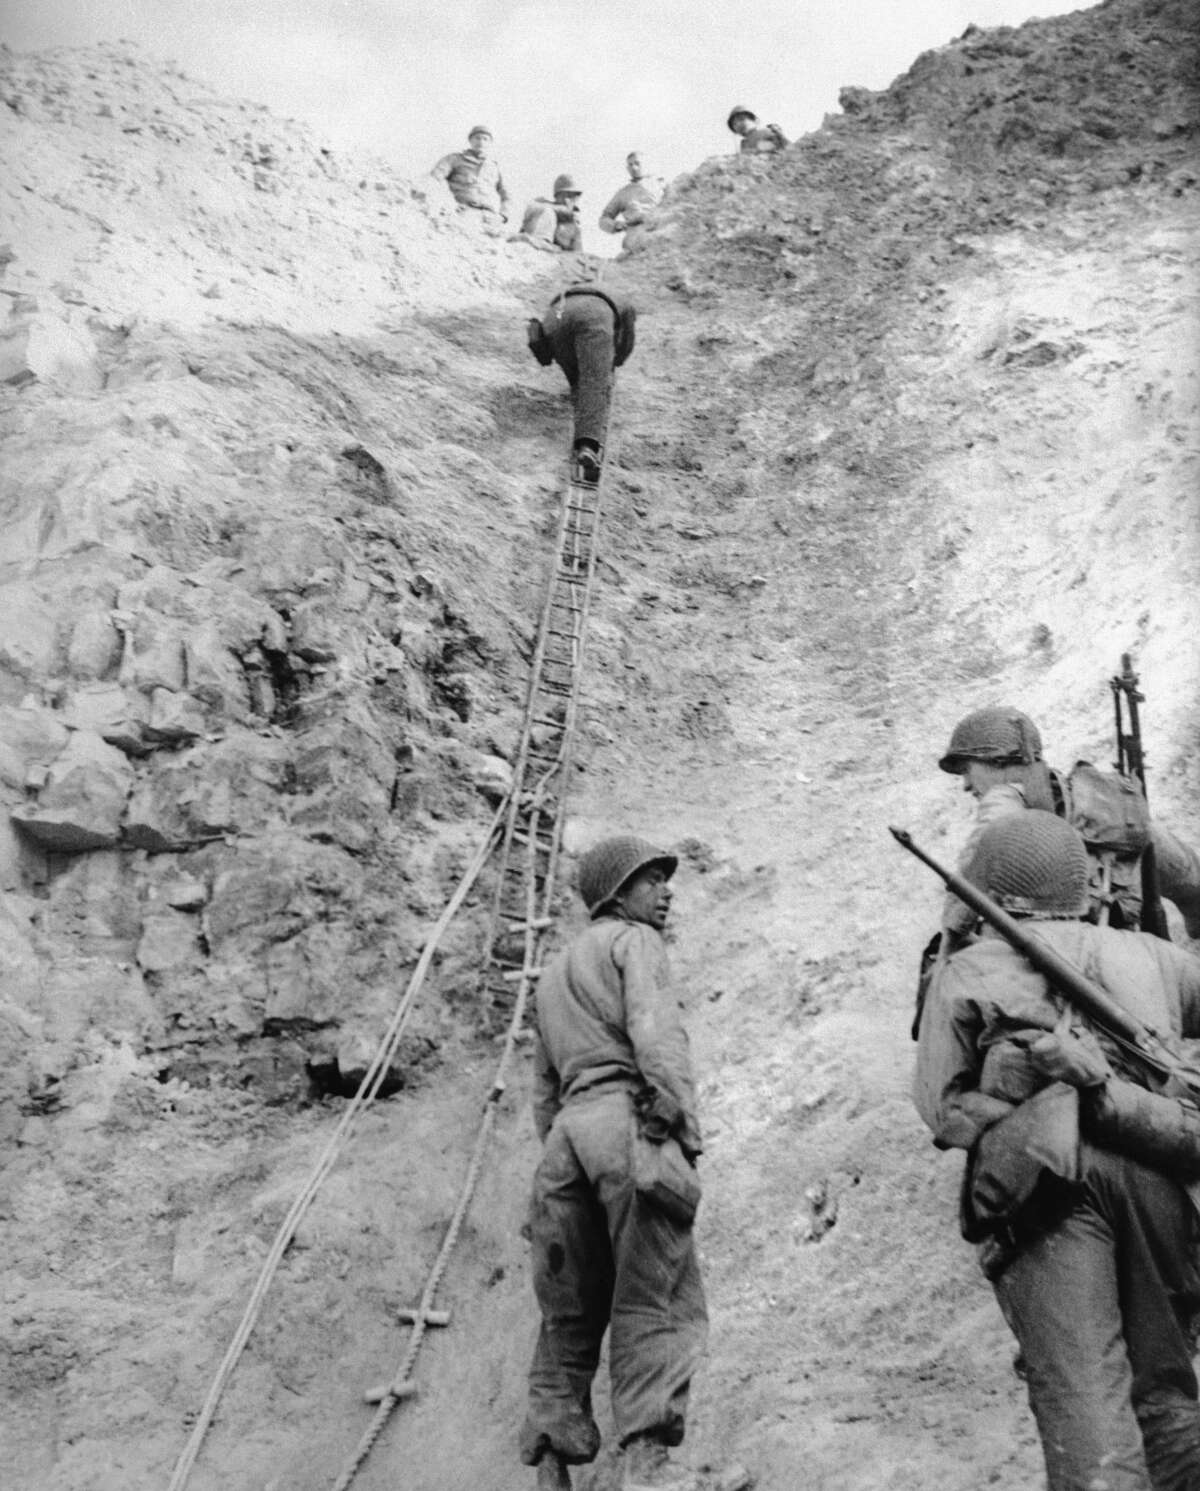 U.S. Army Rangers show off the ladders they used to scale the cliffs at Pointe du Hoc in France on June 6, 1944.